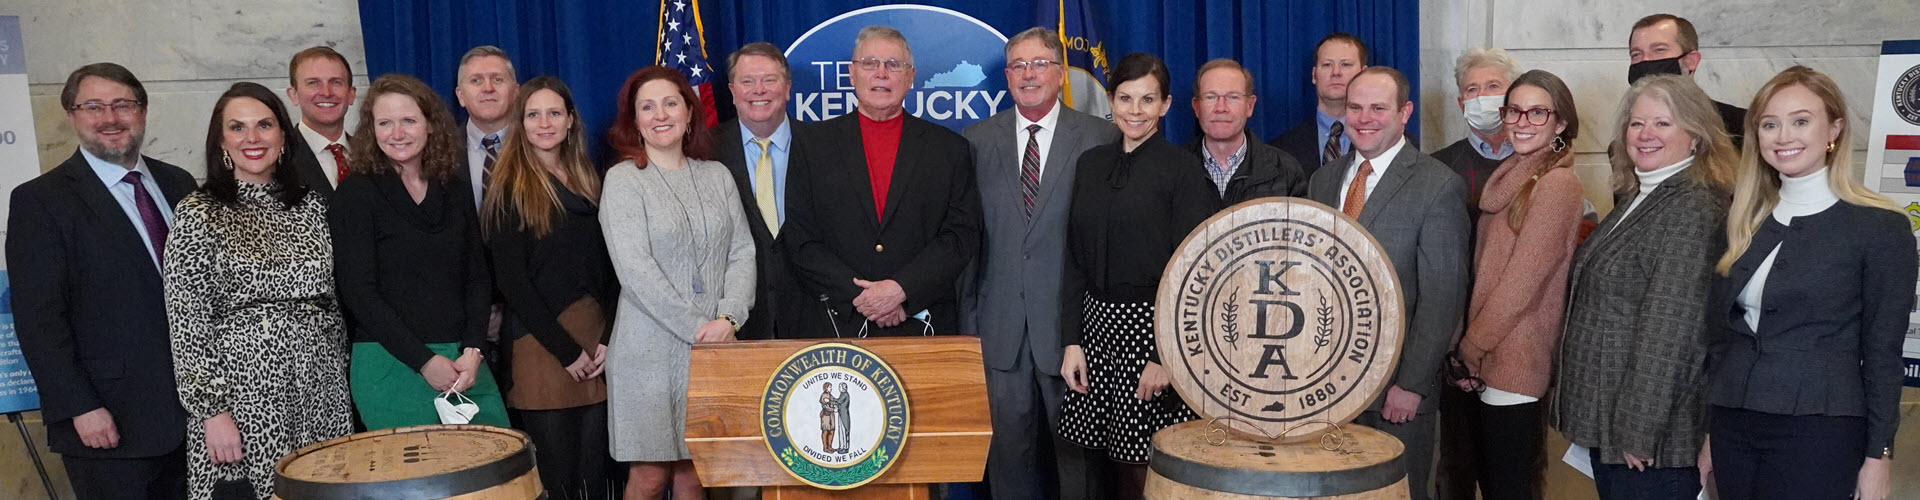 Kentucky Distillers' Association - Members in the Rotunda at the Kentucky State Capital